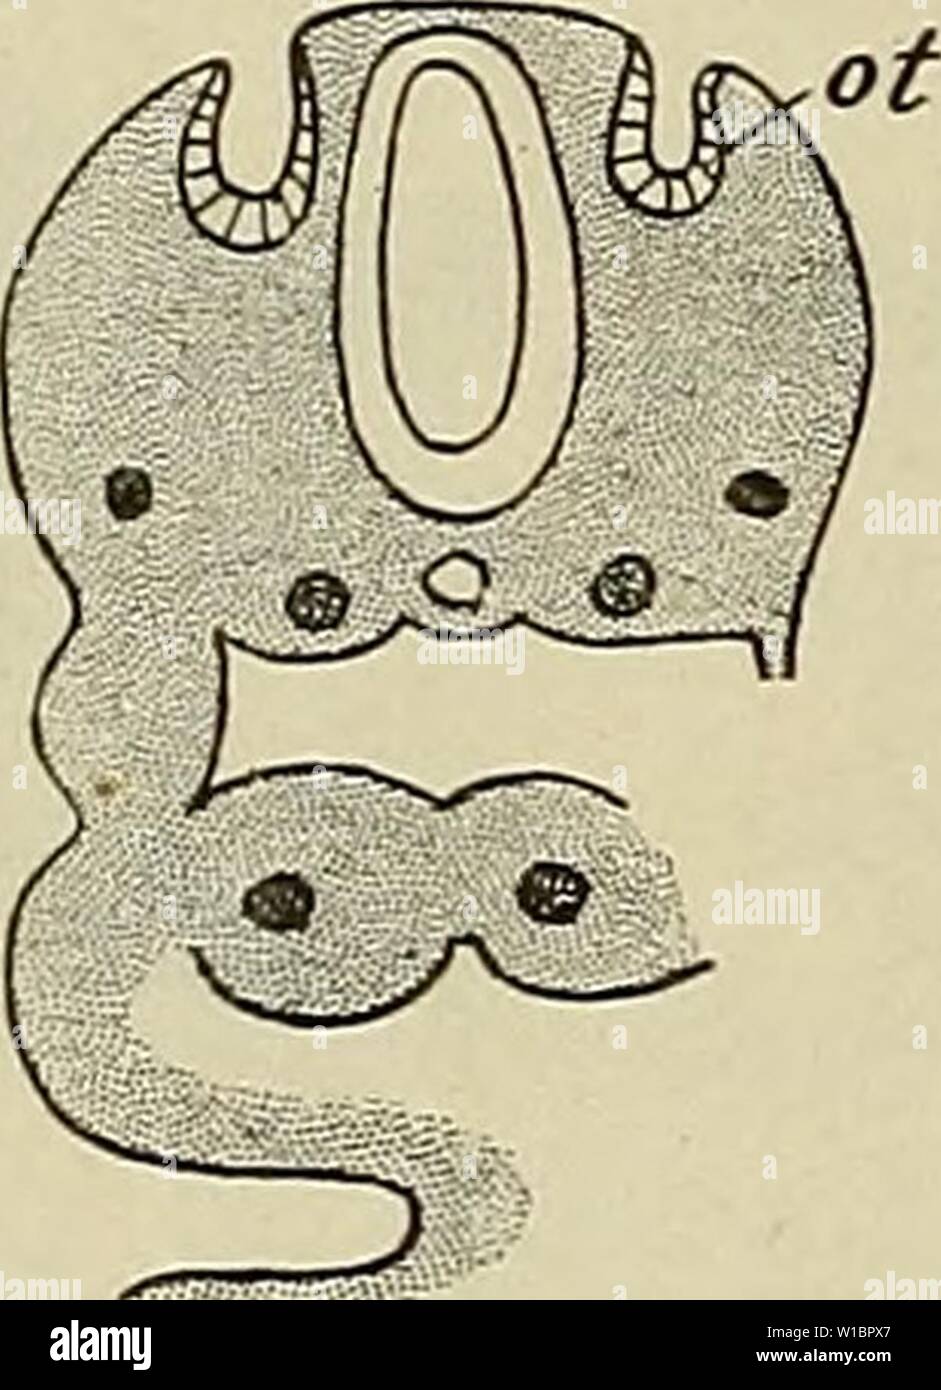 Archive image from page 443 of The development of the human. The development of the human body : a manual of human embryology . developmentofhum00mcmu Year: 1914  432 THE INTERNAL EAR least, confirmed by the embryonic development. The inner ear, which is the sensory portion proper, is an ectodermal structure, which secondarily becomes deeply seated in the mesodermal tissue of the head, while the middle and outer ears, which provide the apparatus necessary for the conduction of the sound-waves to the inner ear, are modified portions of the anterior branchial arches. It will be convenient, accor Stock Photo